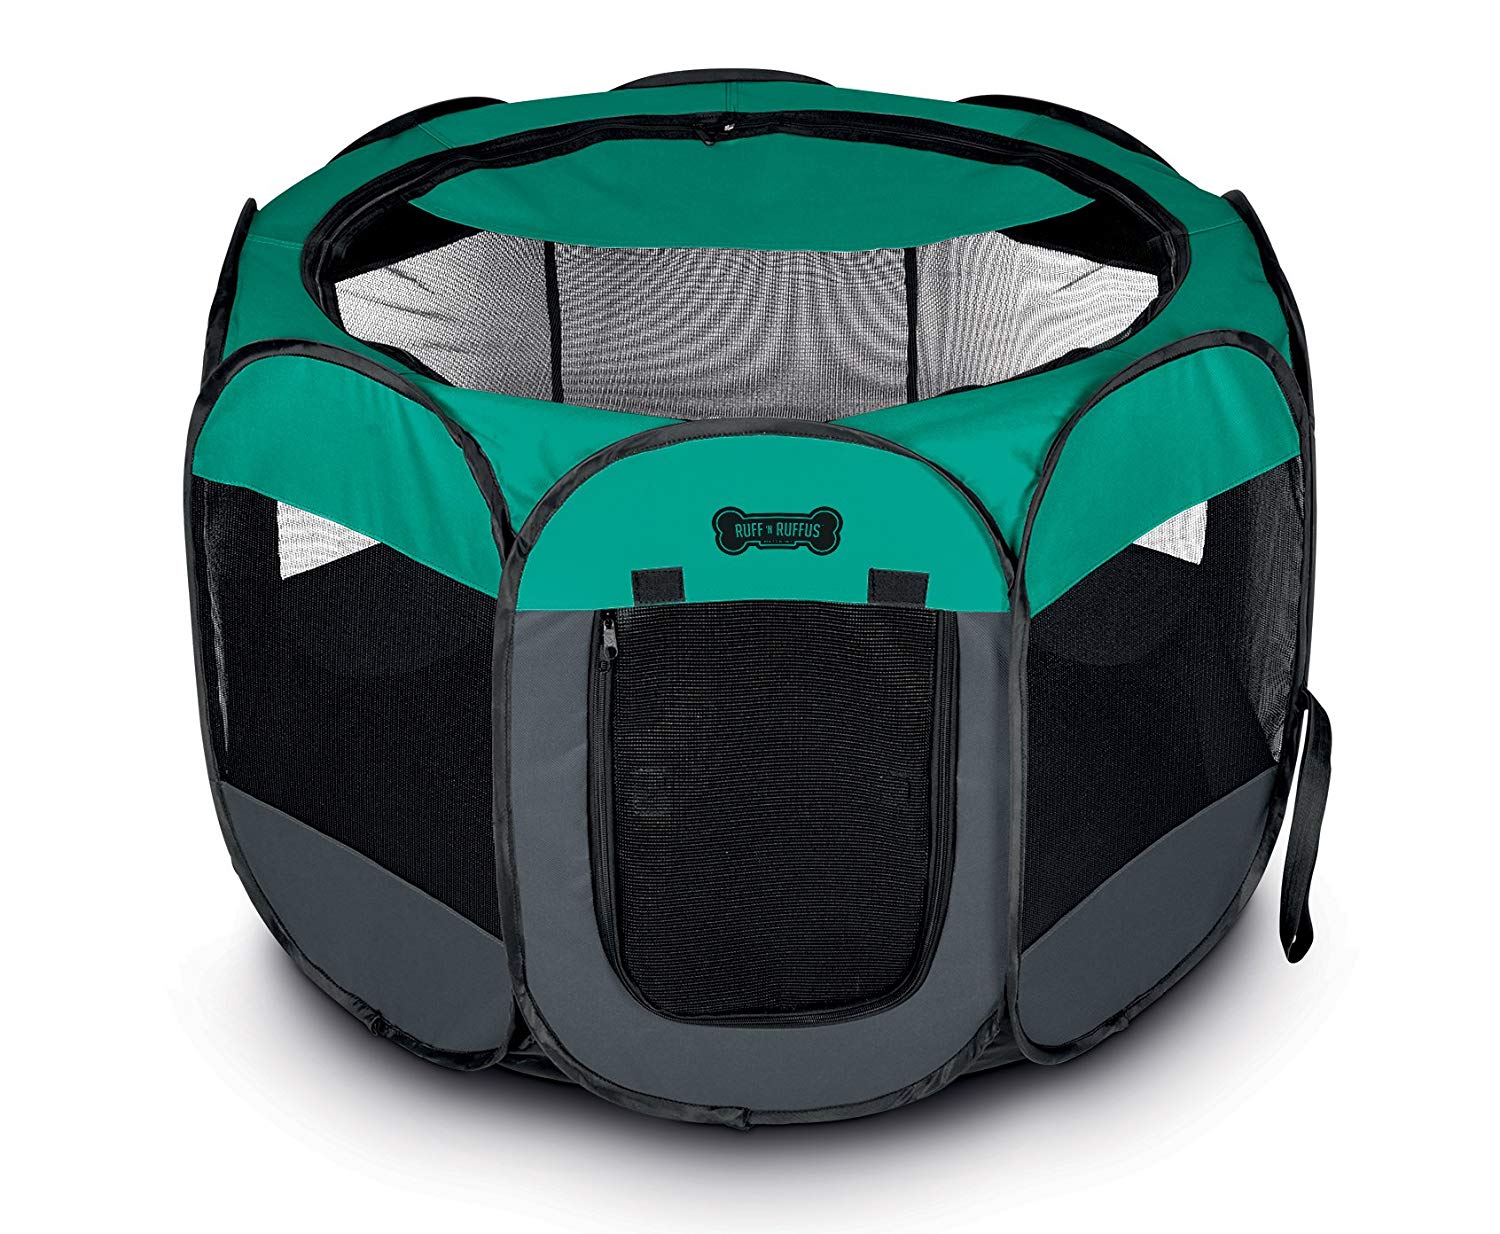 AIOIAI Portable Foldable Pet Playpen + Carrying Case & Collapsible Travel Bowl | Indoor / Outdoor use | Water resistant | Removable shade cover | Dogs / Cats / Rabbit